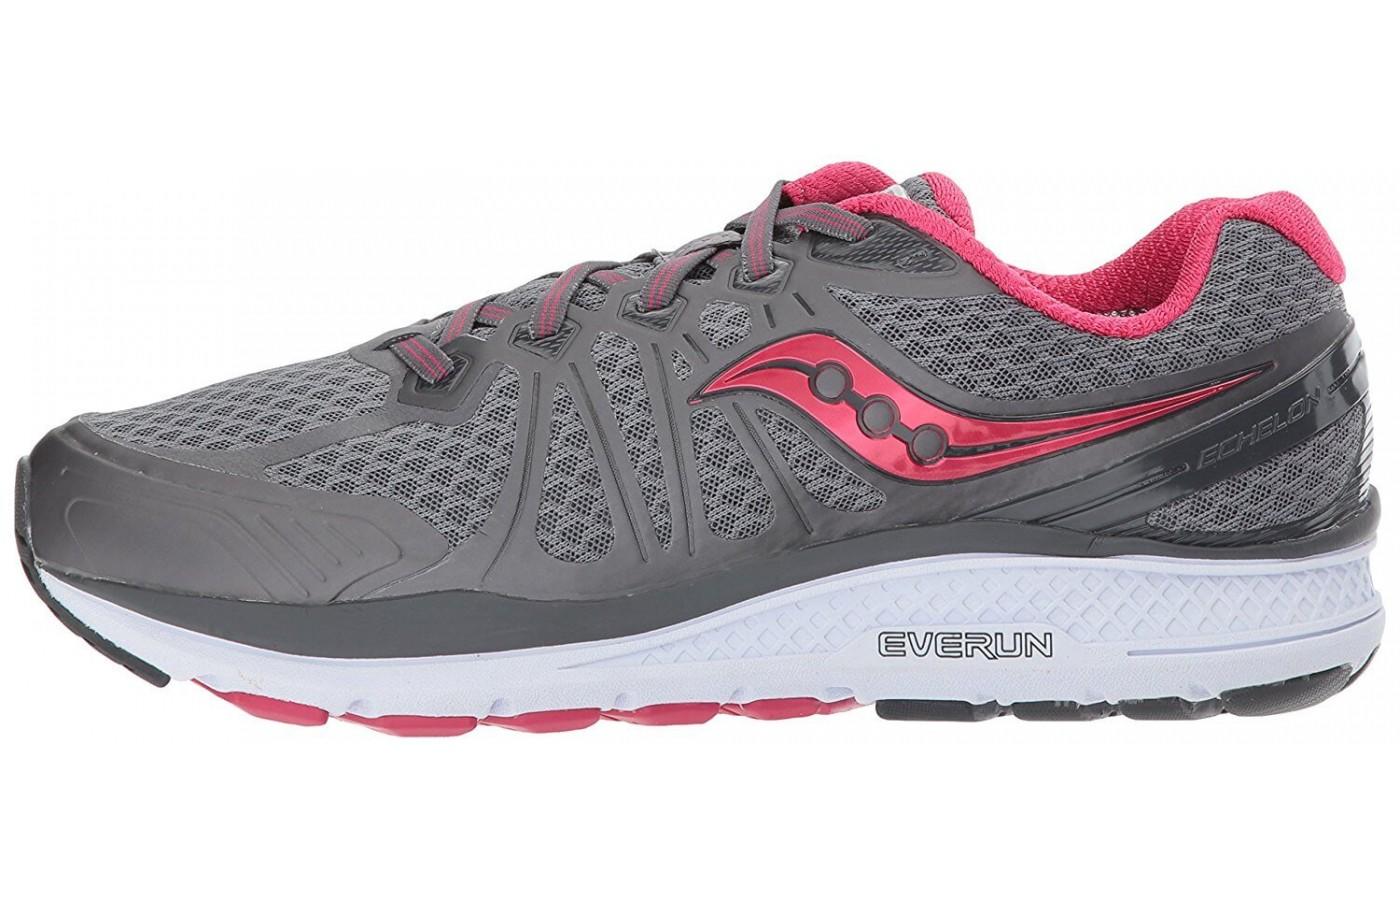 The Saucony Echelon 6 uses a Foundation Platform for high volume feet, such as runners and people who need medical orthotics